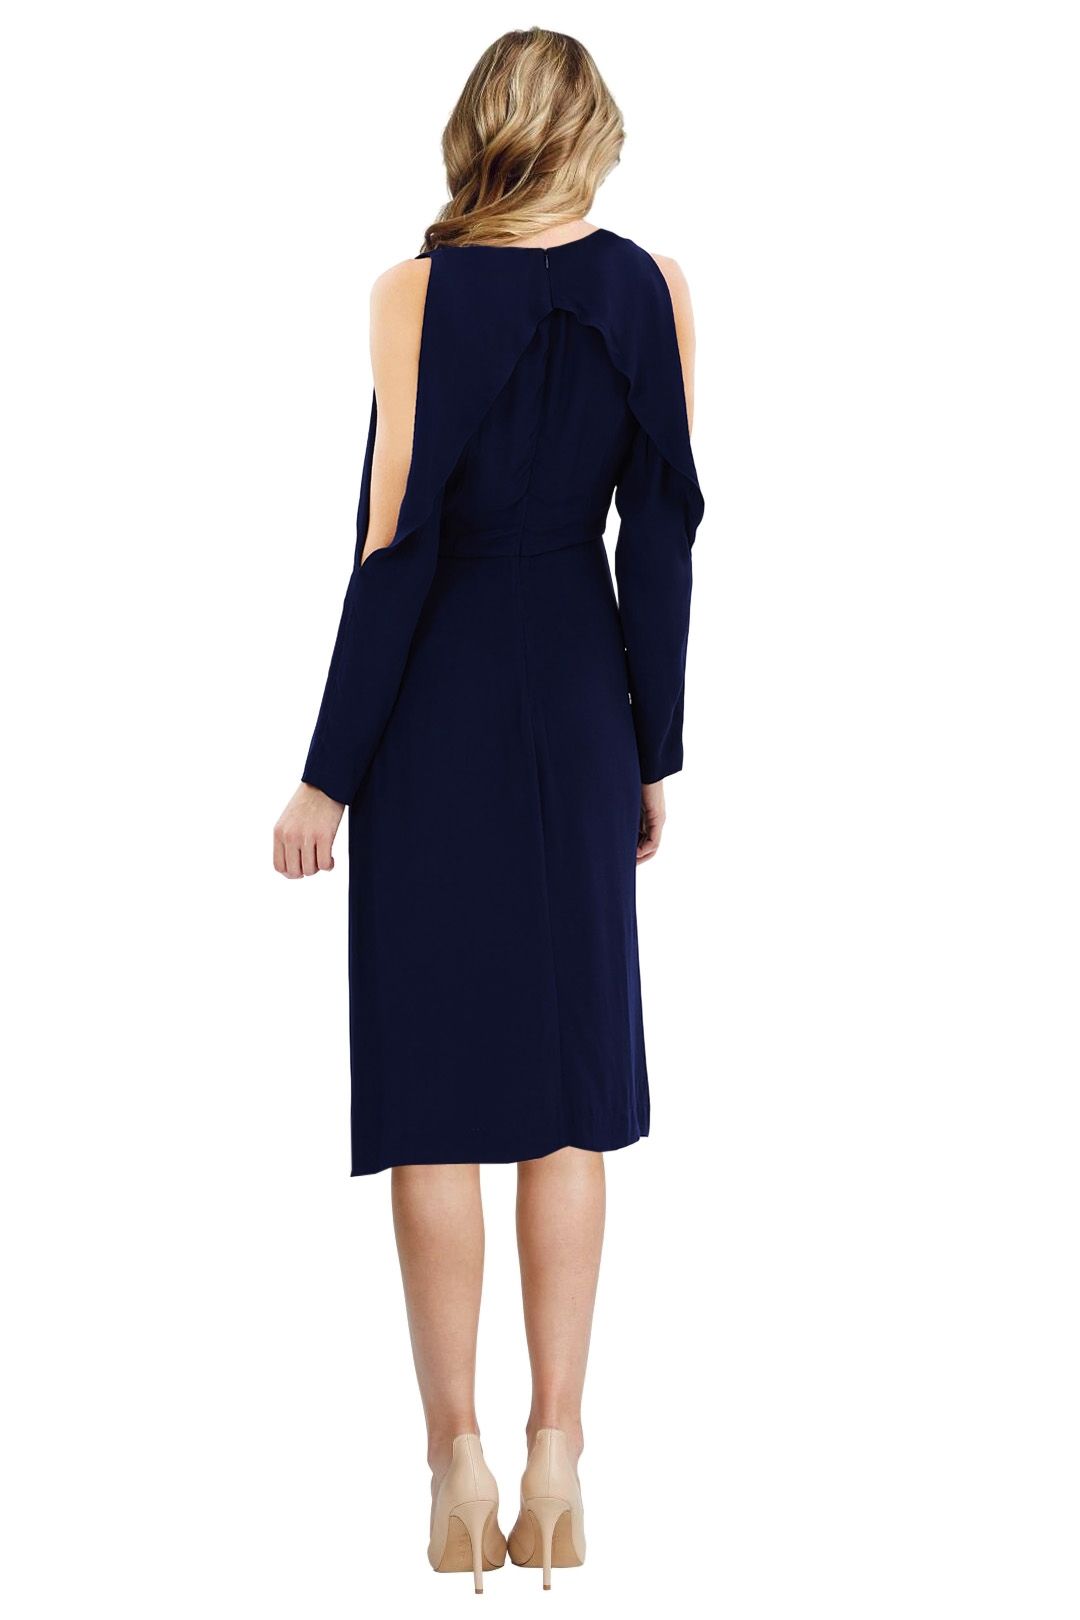 C/MEO Collective - Do It Now Dress - Blue - Back